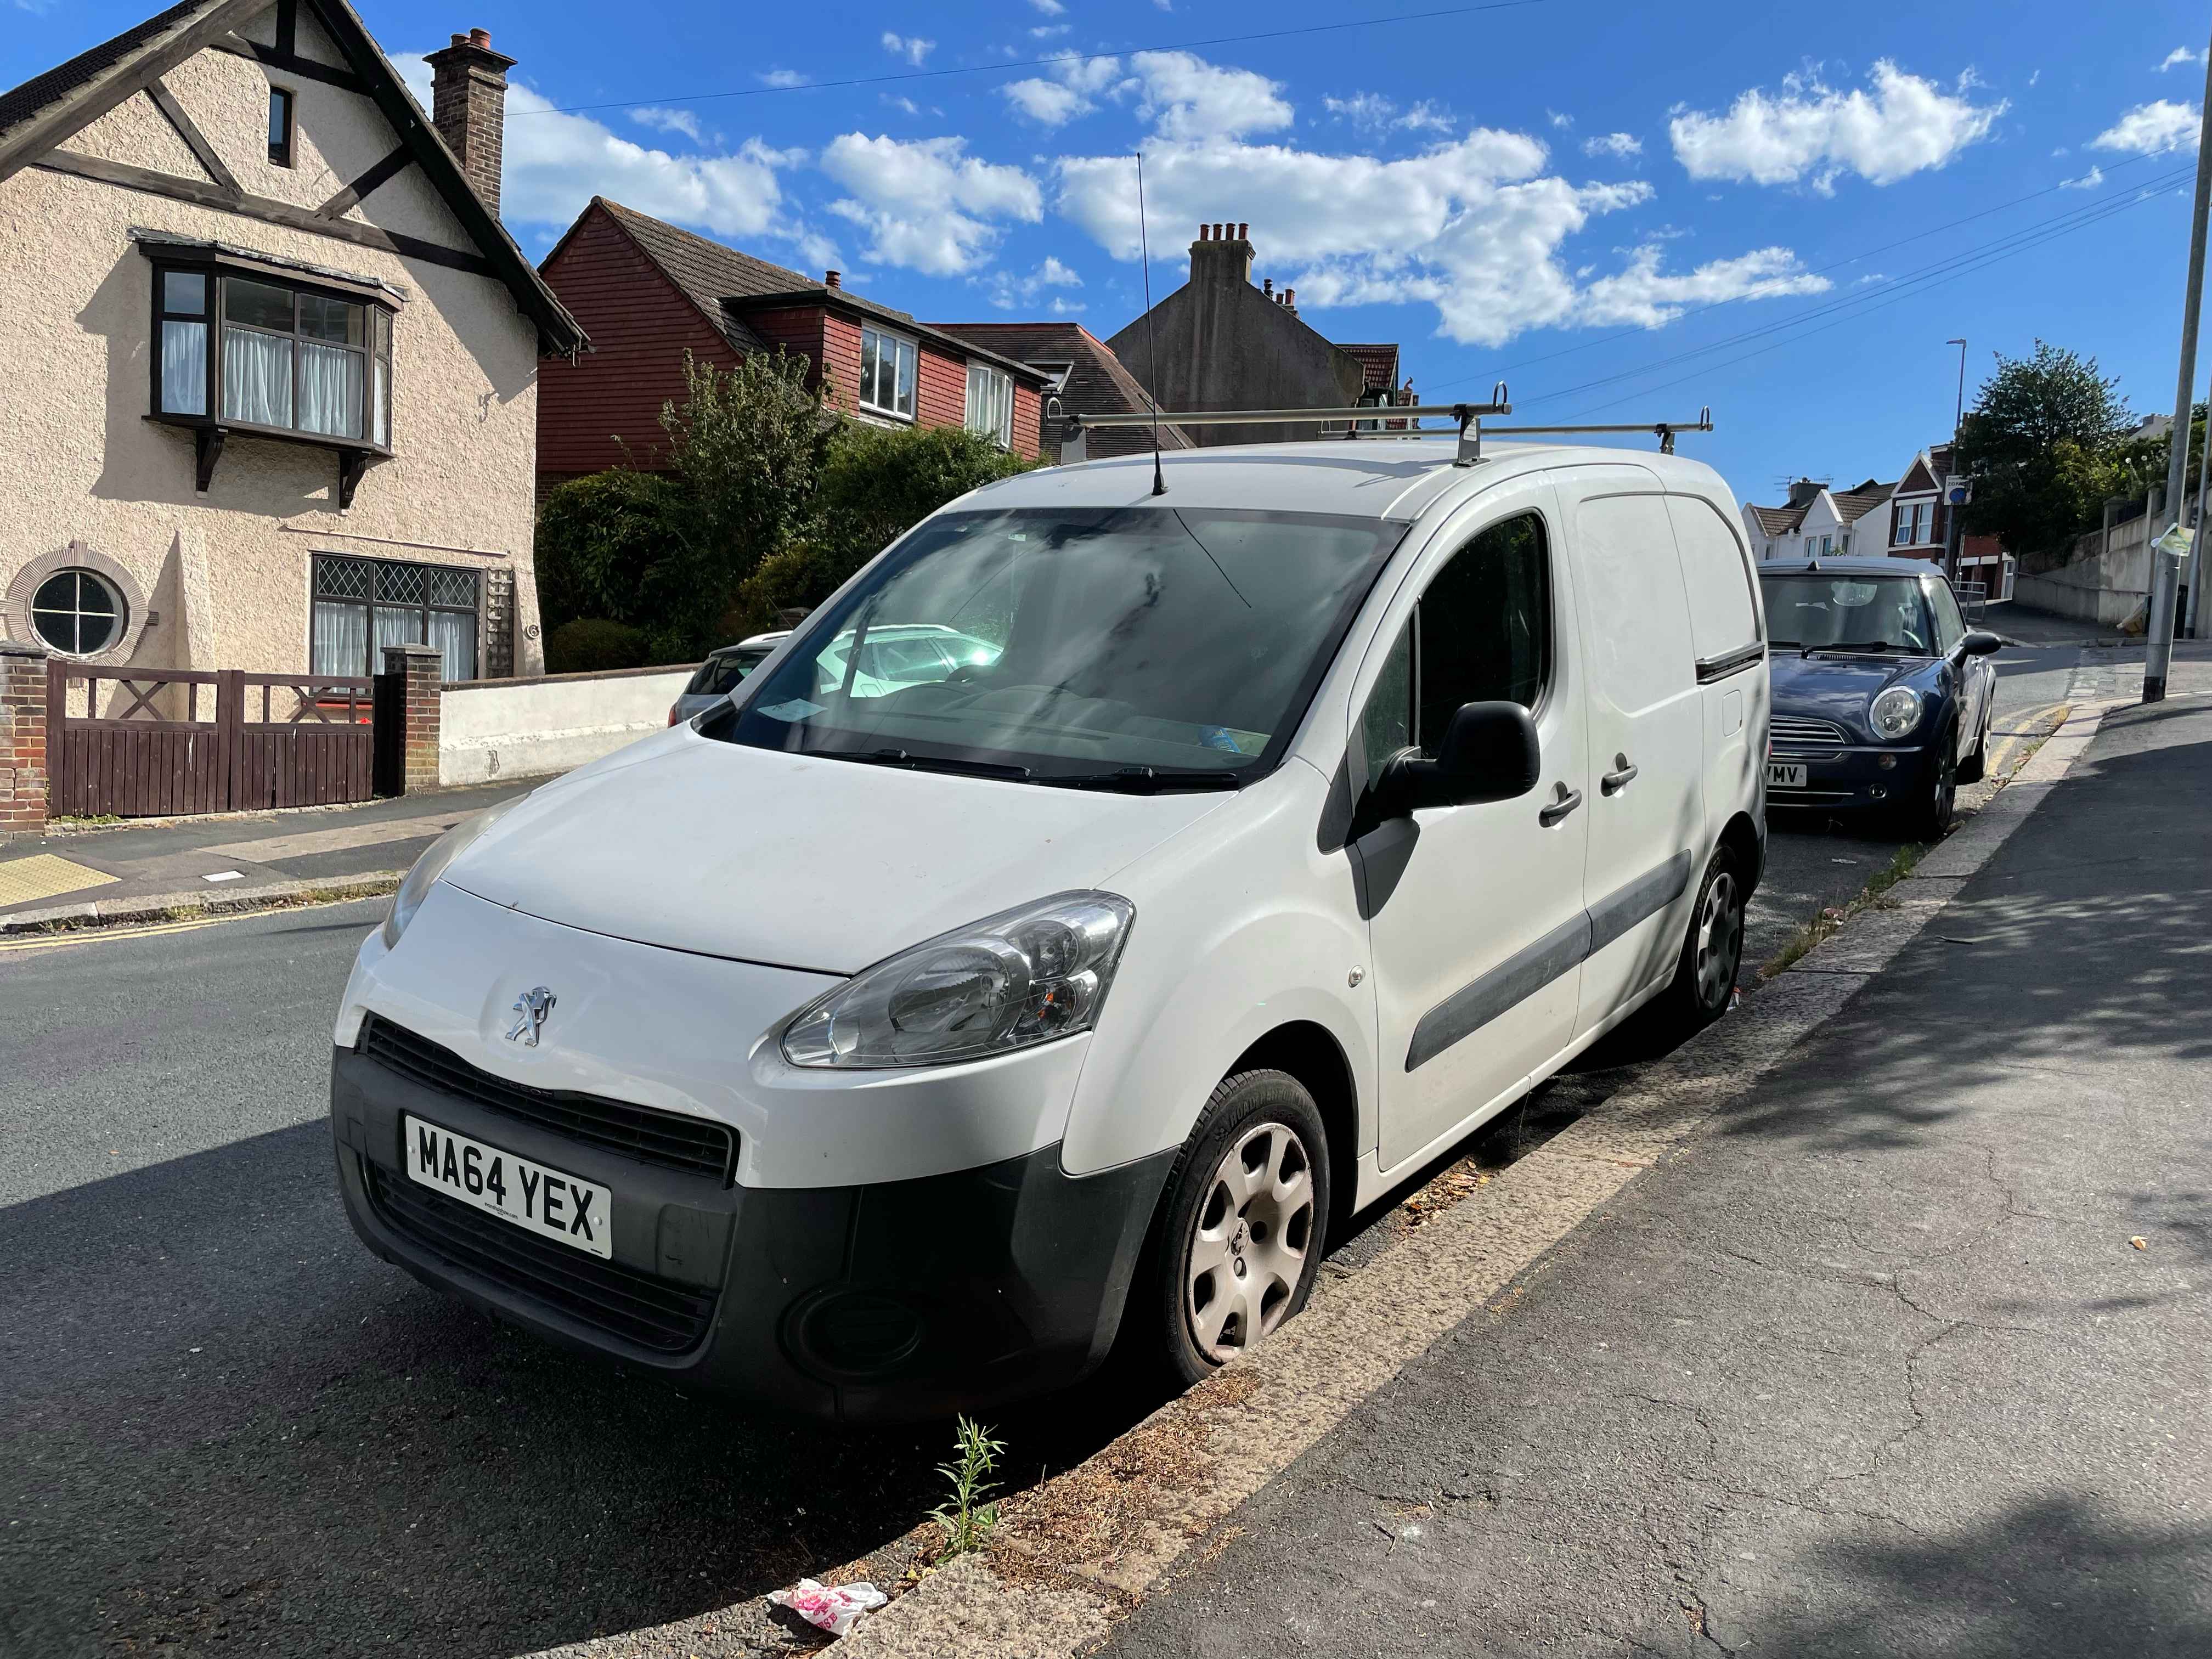 Photograph of MA64 YEX - a White Peugeot Partner parked in Hollingdean by a non-resident. The first of six photographs supplied by the residents of Hollingdean.